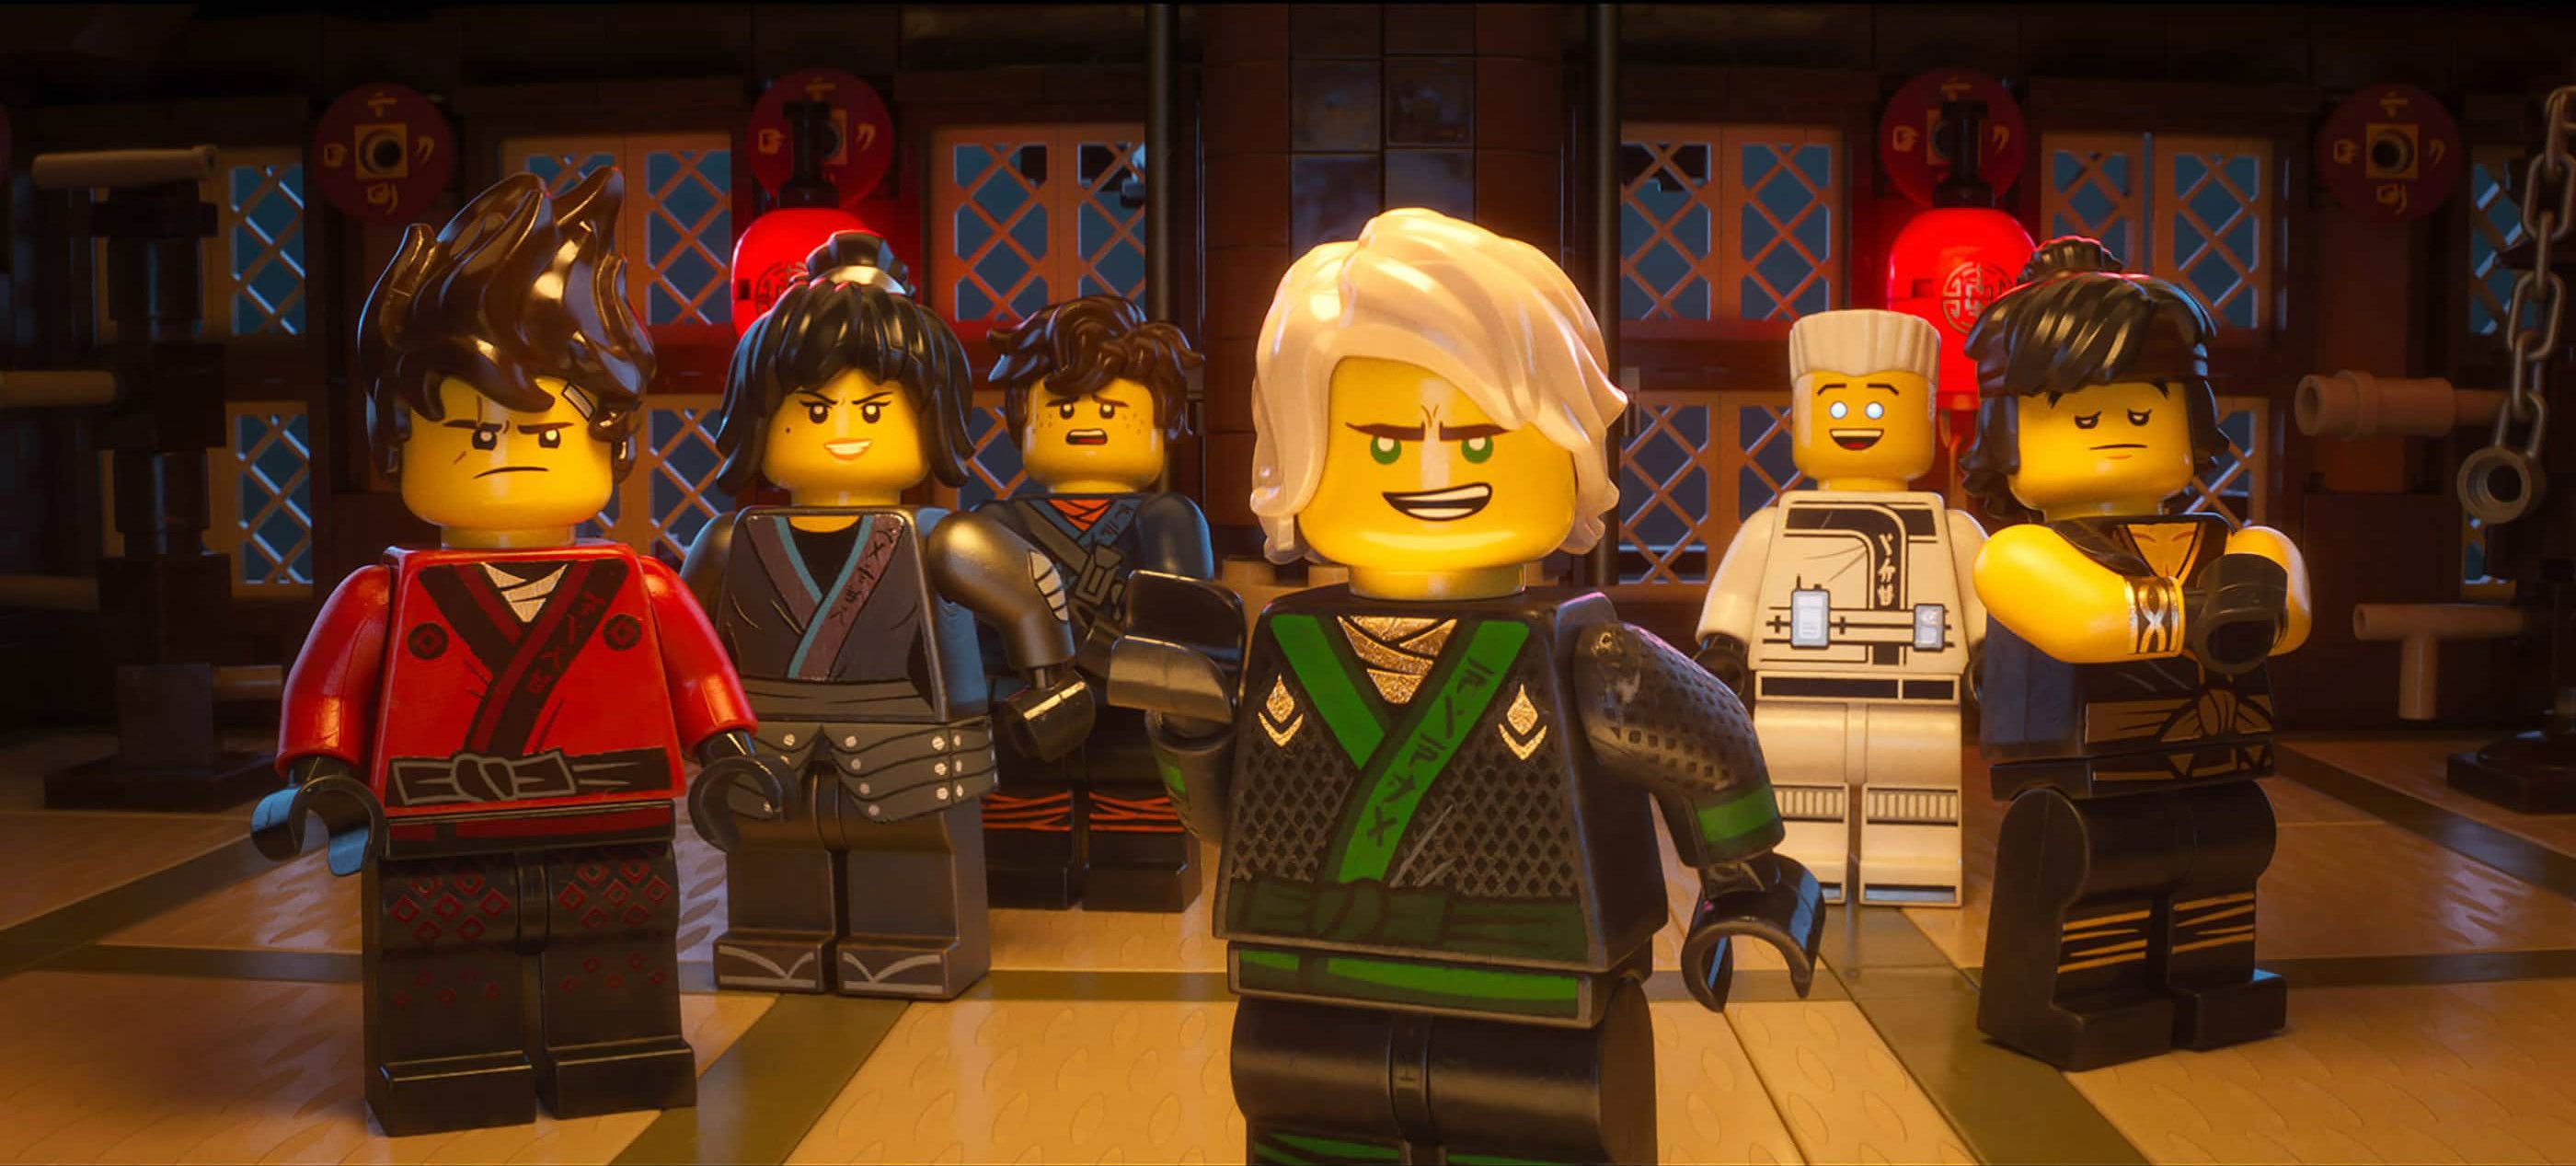 LEGO Ninjago Movie Images Reveal Master Wu and His Squad